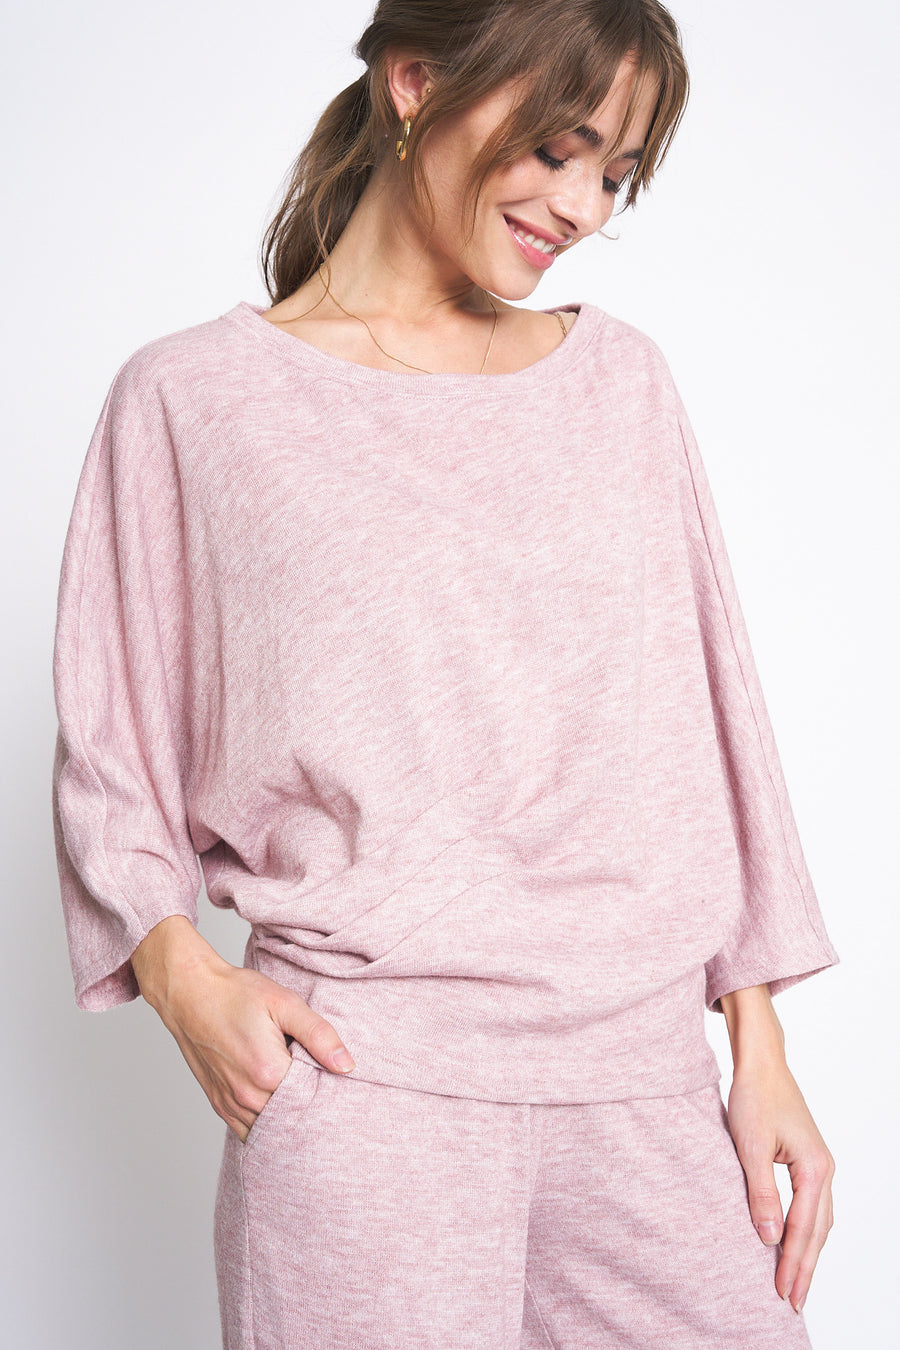 No Srcipt image - Images of 4 of 7 Pink Knit Long Sleeve and Pant Set